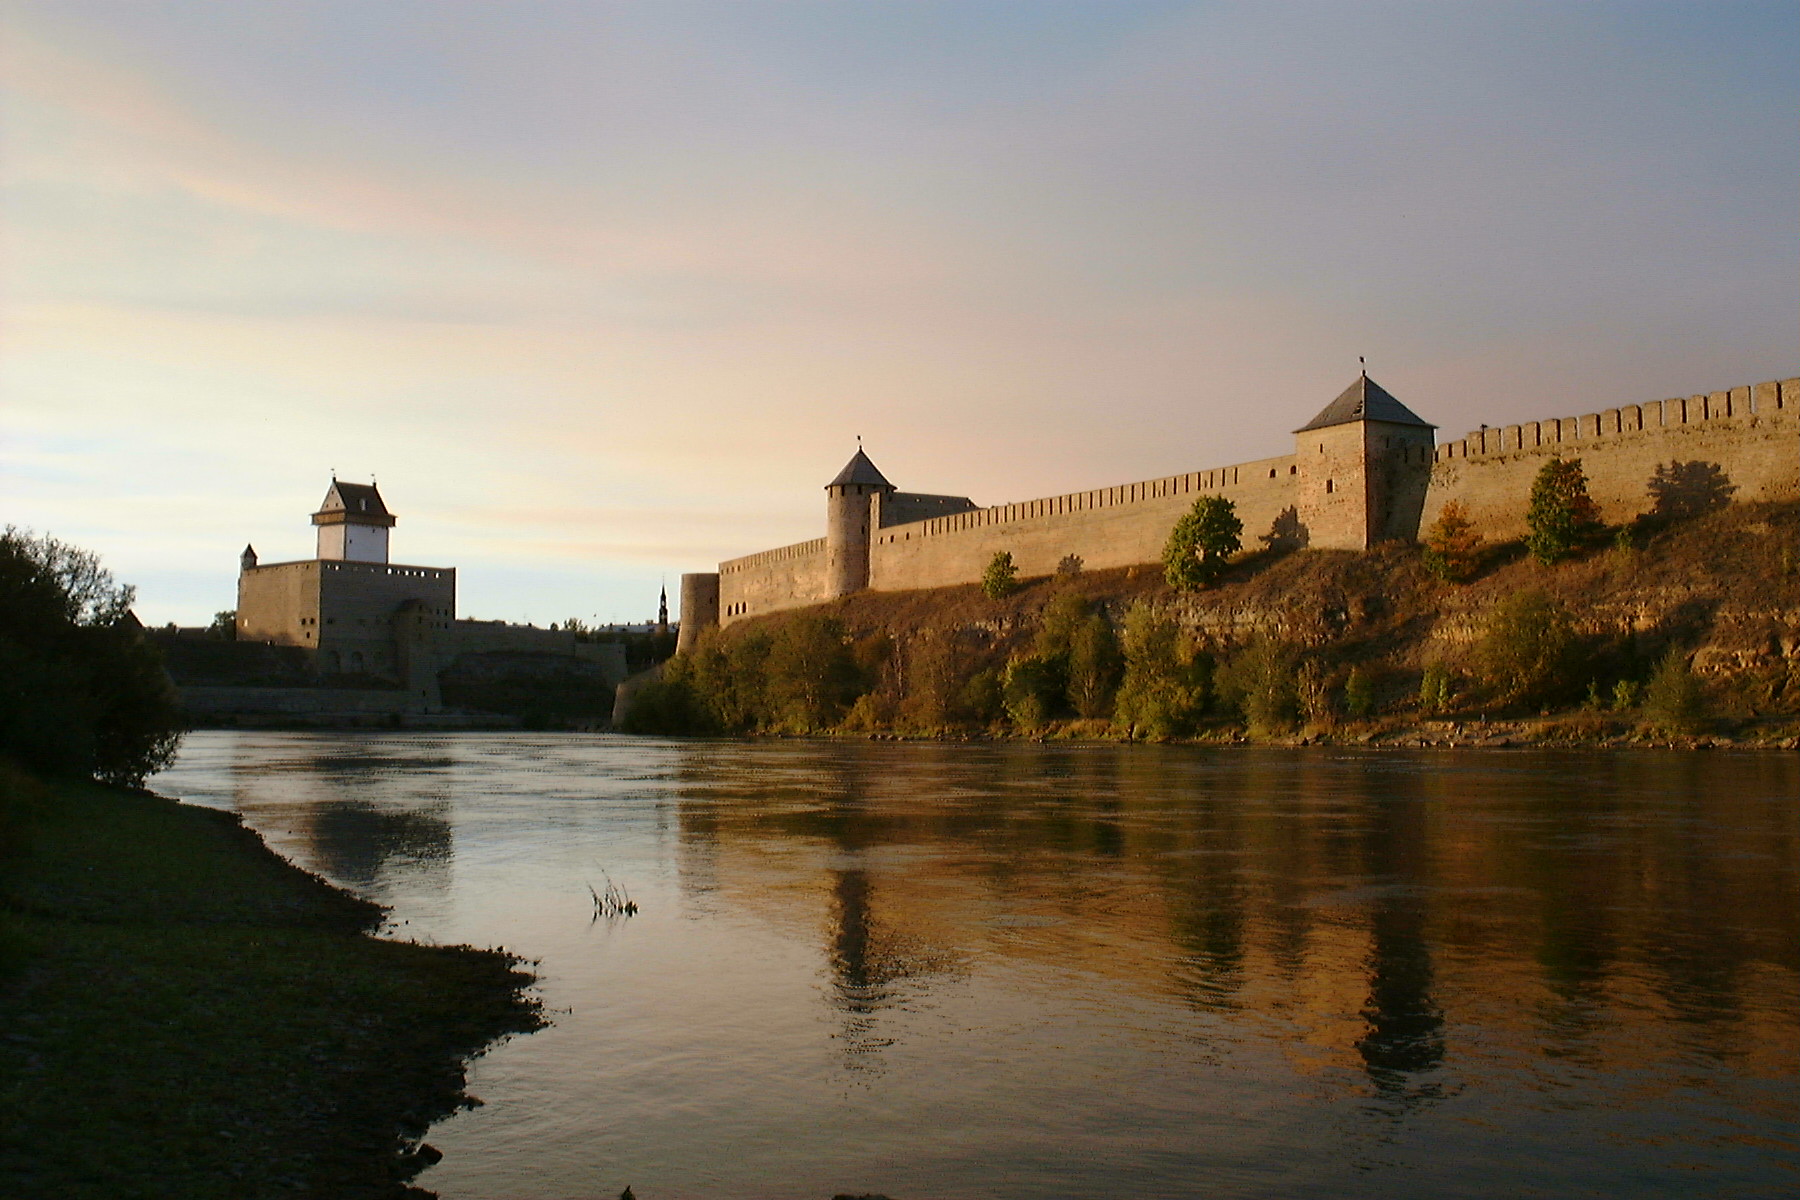 A river runs alongside an old stone fortress with multiple towers and walls, set against a sunset sky. Trees and greenery line the opposite bank.